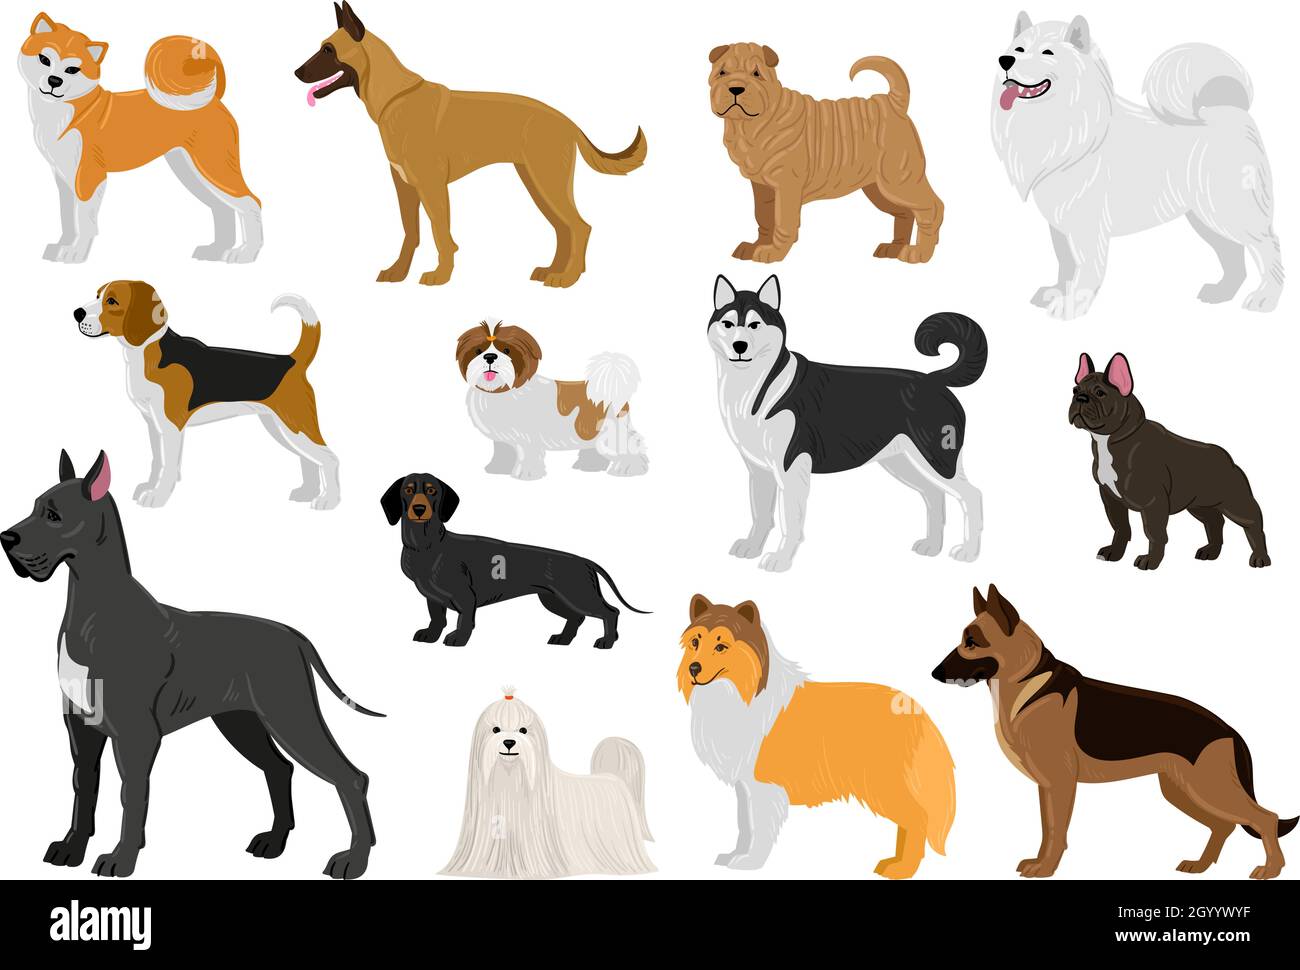 Cartoon dogs different breeds, funny domestic puppy pets. Husky, beagle, great dane, french bulldog and maltese dogs vector illustration set. Cute Stock Vector